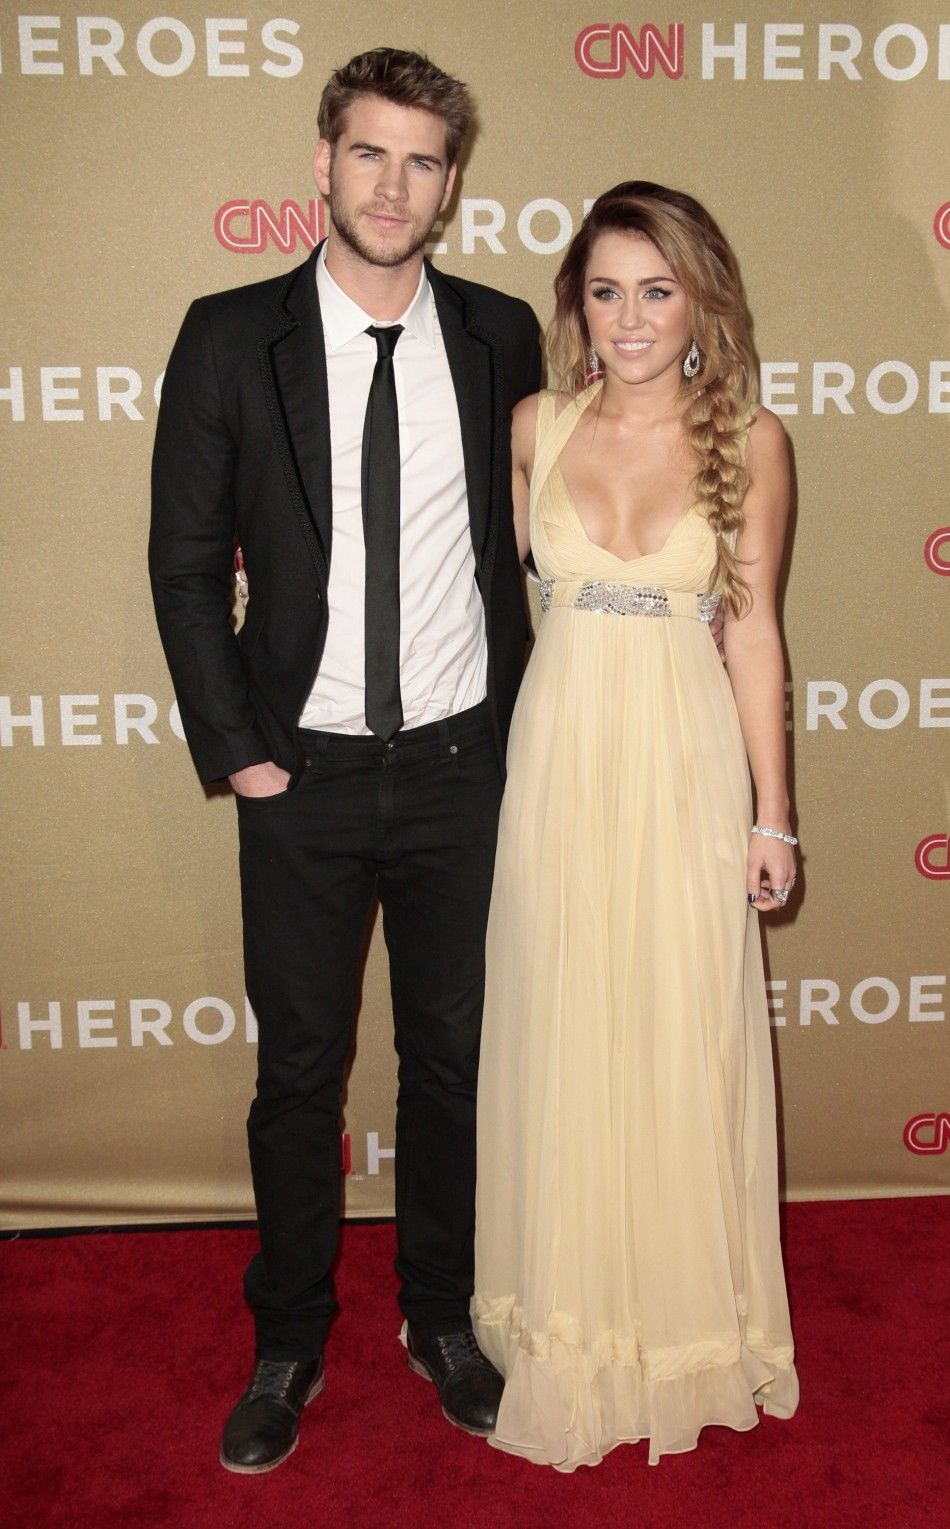 Actress and musician Cyrus and actor Hemsworth arrive at the CNN Heroes An All-Star Tribute event at the Shrine Auditorium in Los Angeles, California